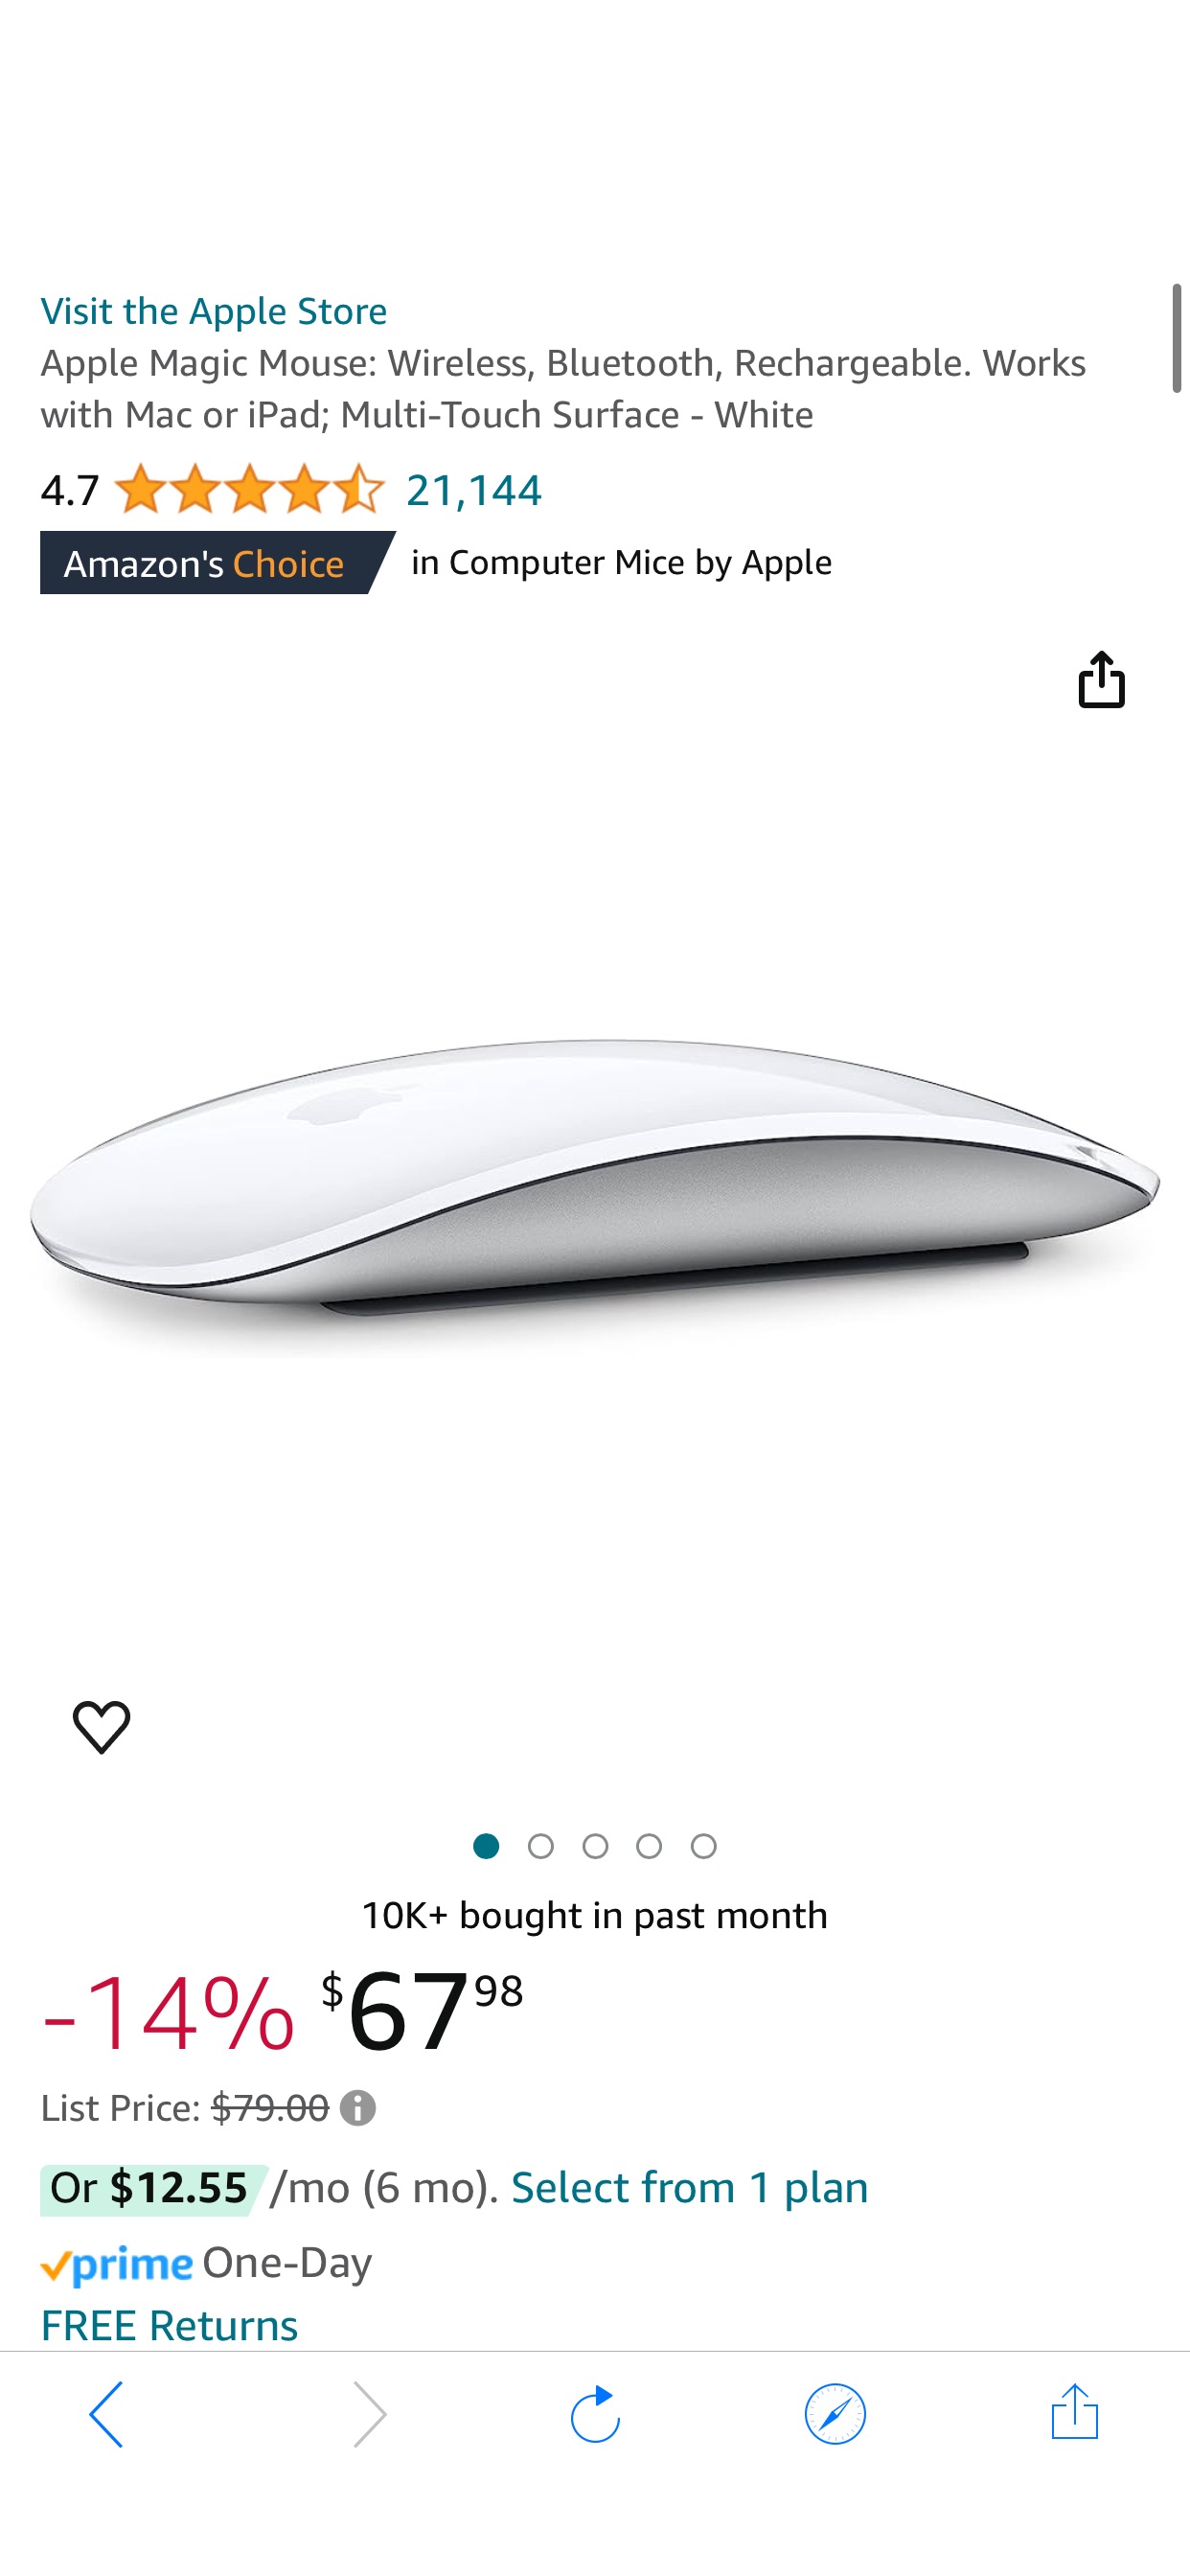 Amazon.com: Apple Magic Mouse: Wireless, Bluetooth, Rechargeable. Works with Mac or iPad; Multi-Touch Surface - White : Electronics 苹果鼠标